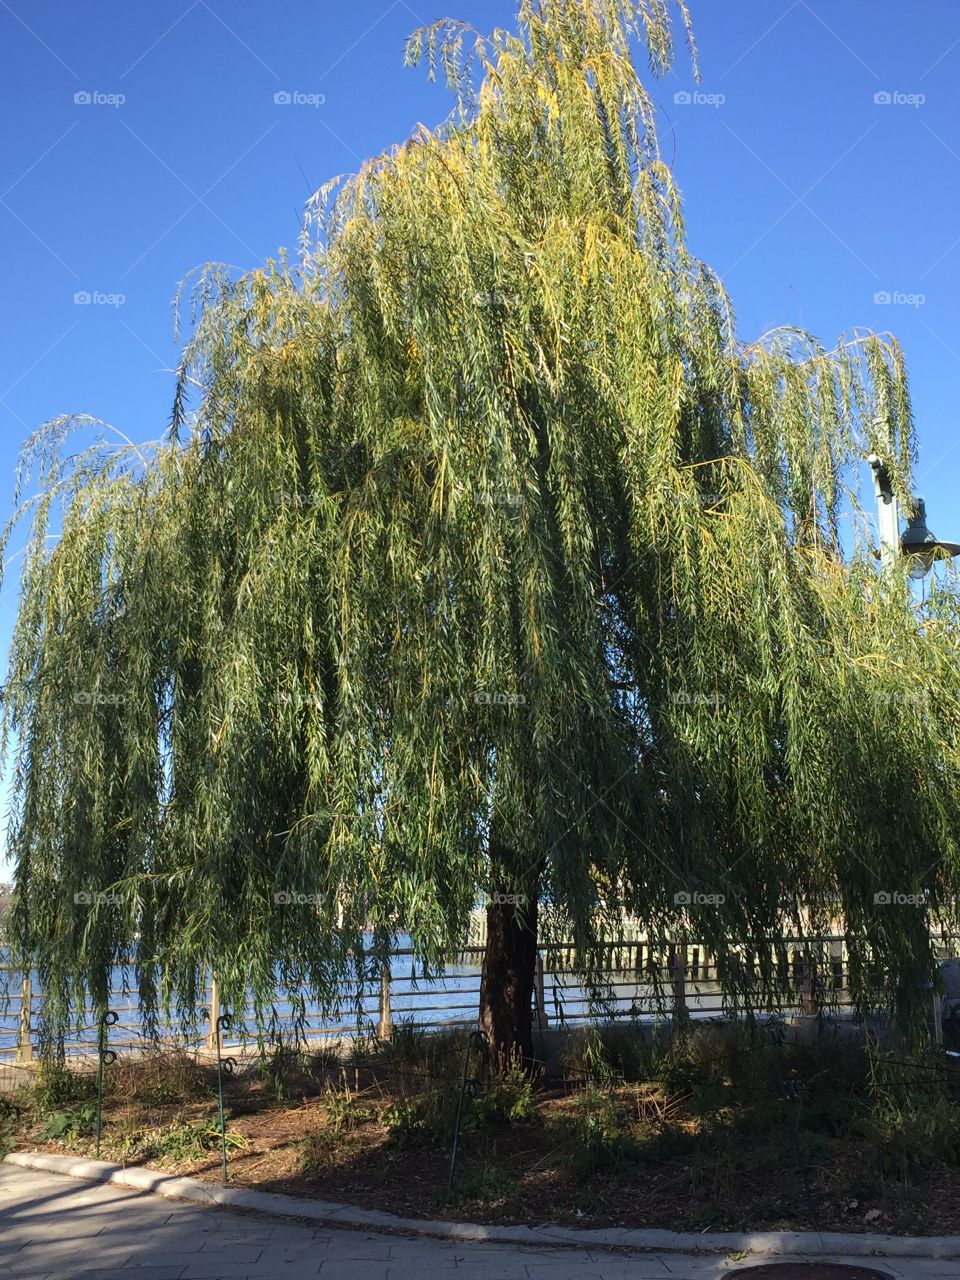 Weeping willow NYC 